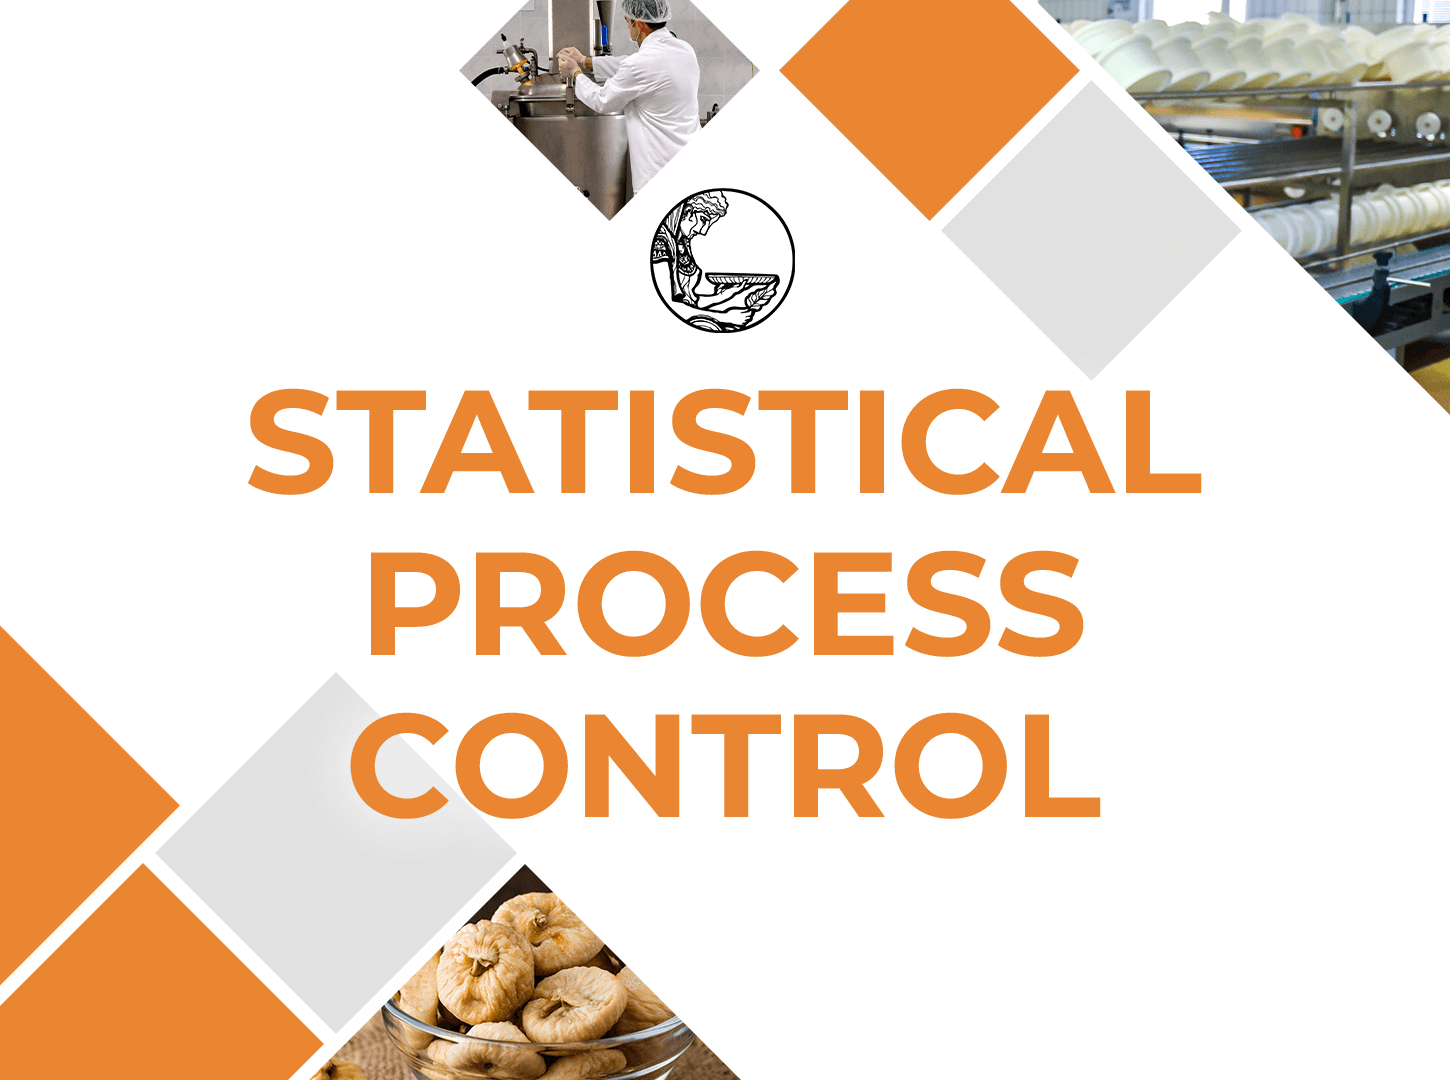 Featured image for “Statistical Process Control with Presage Analytics”